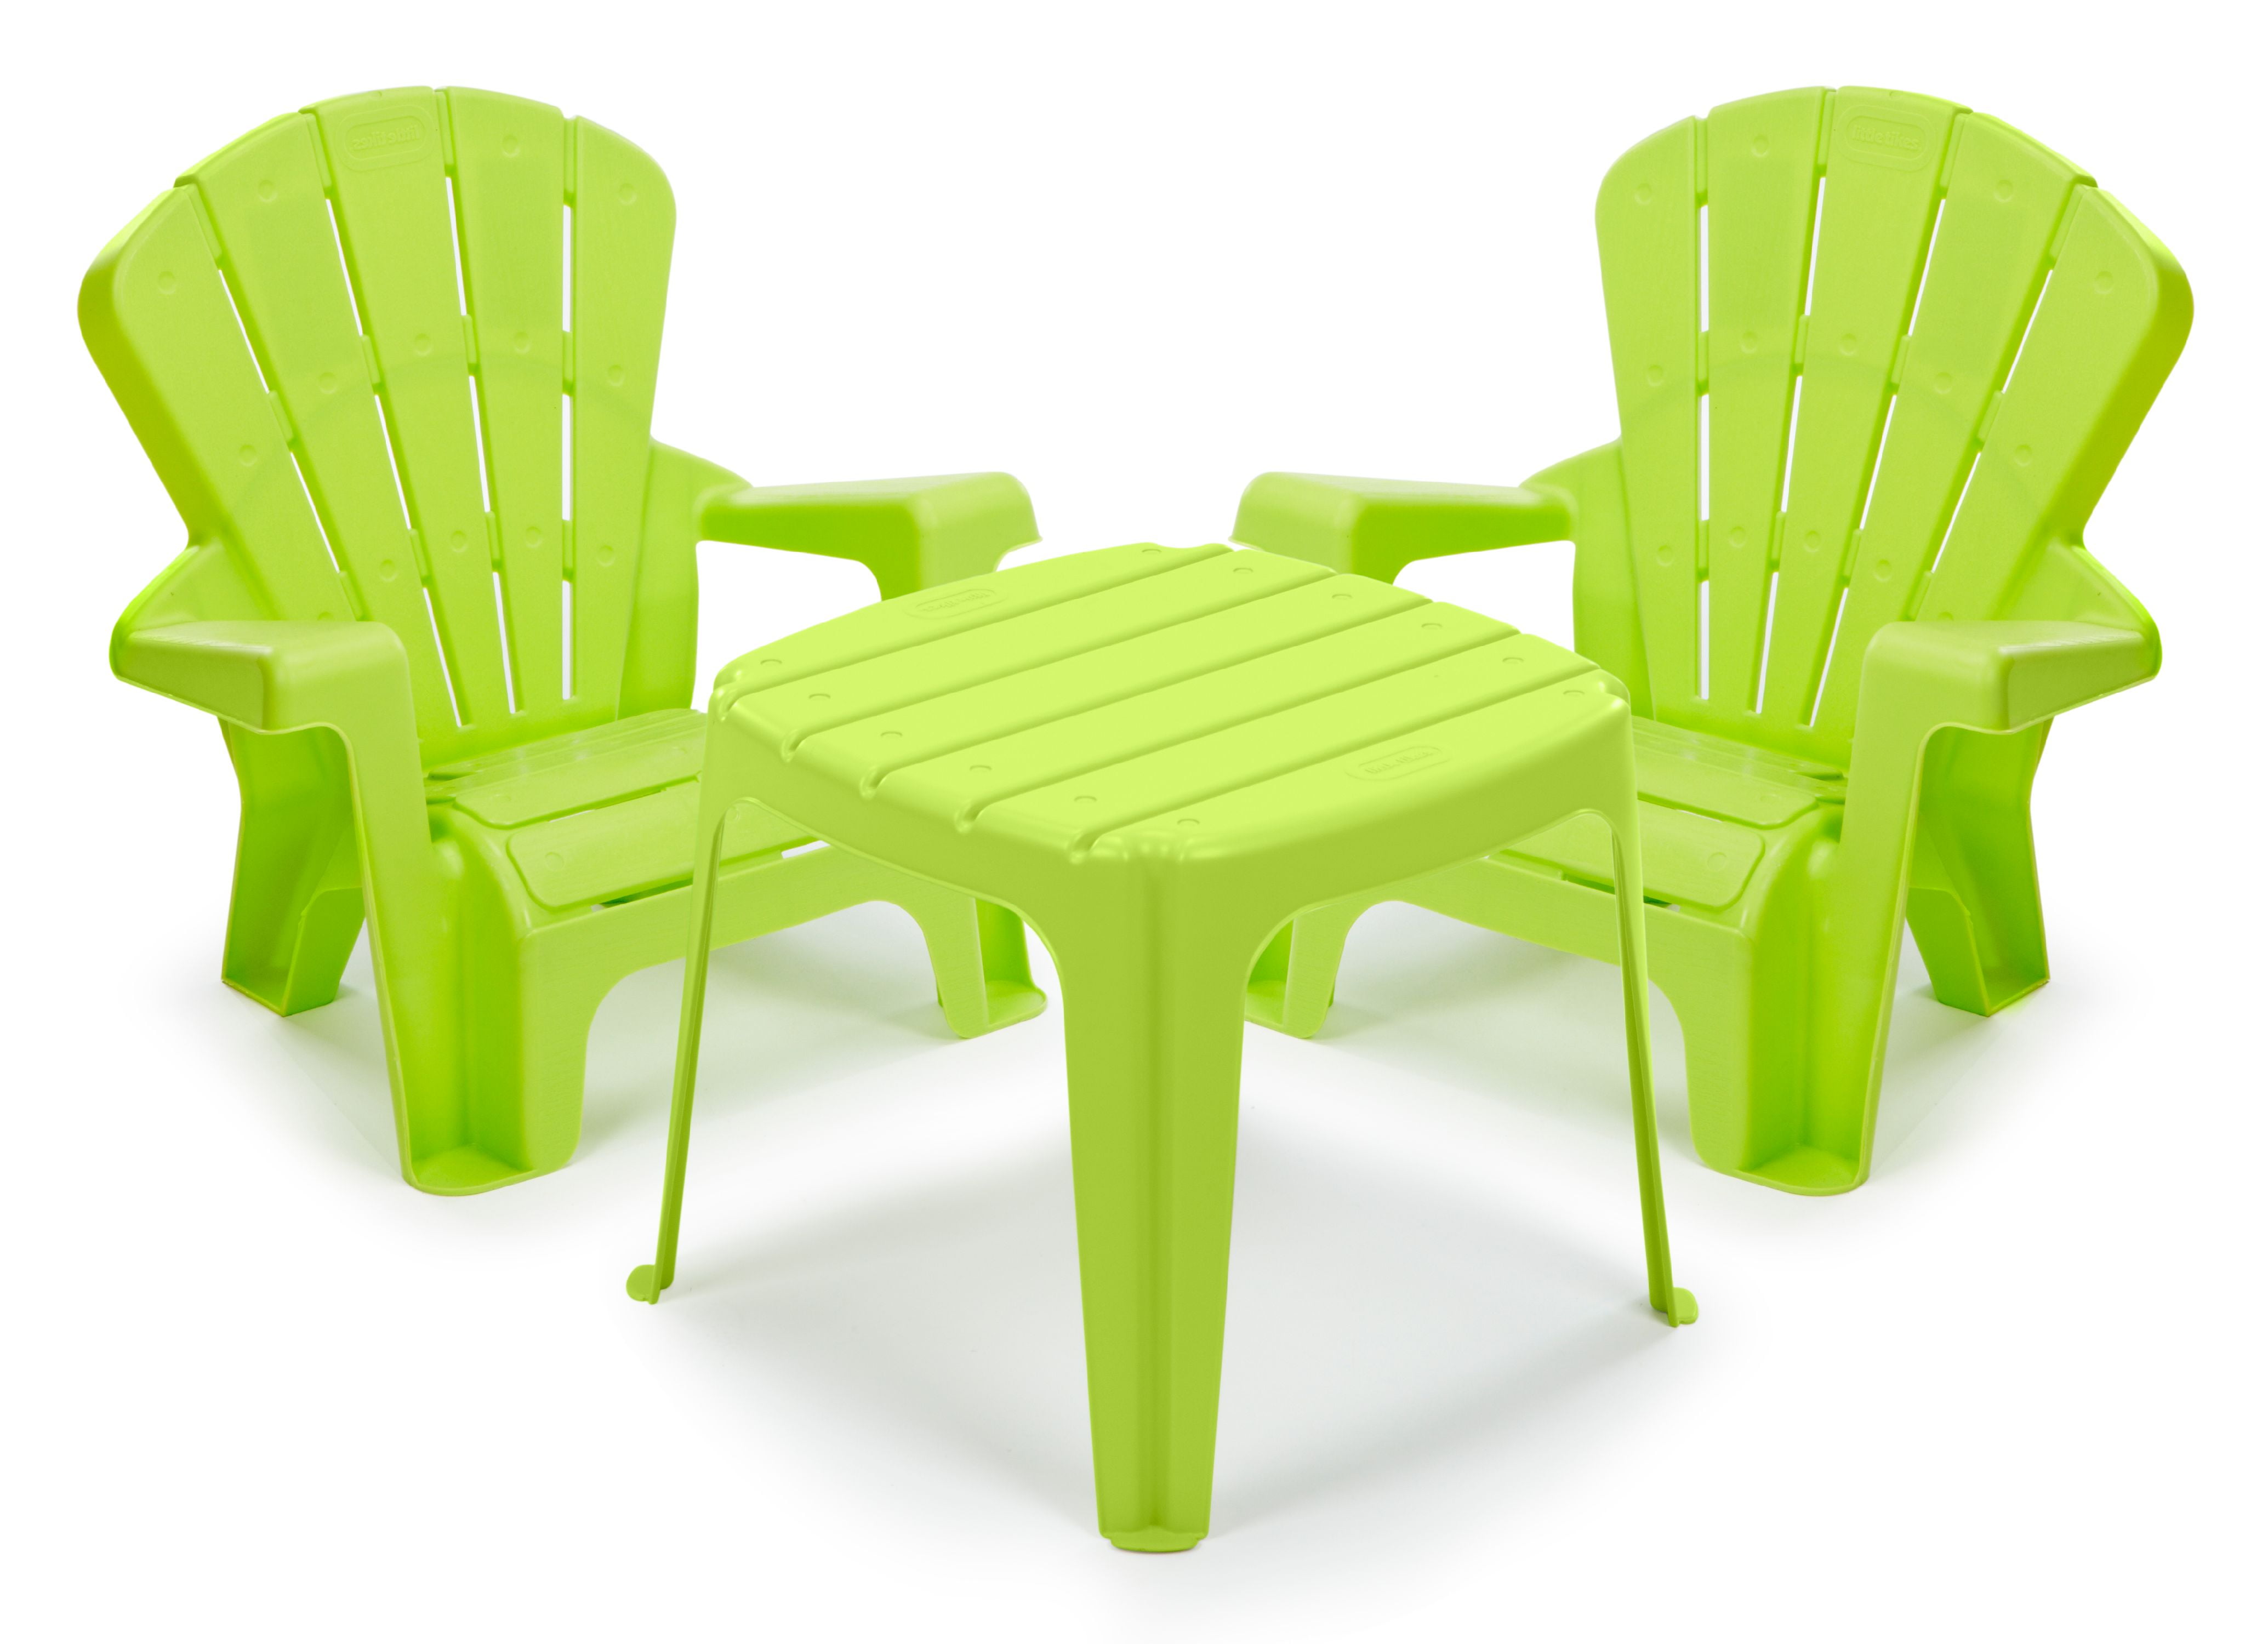 Little Tikes Garden Table & Chairs Set Green Play Home